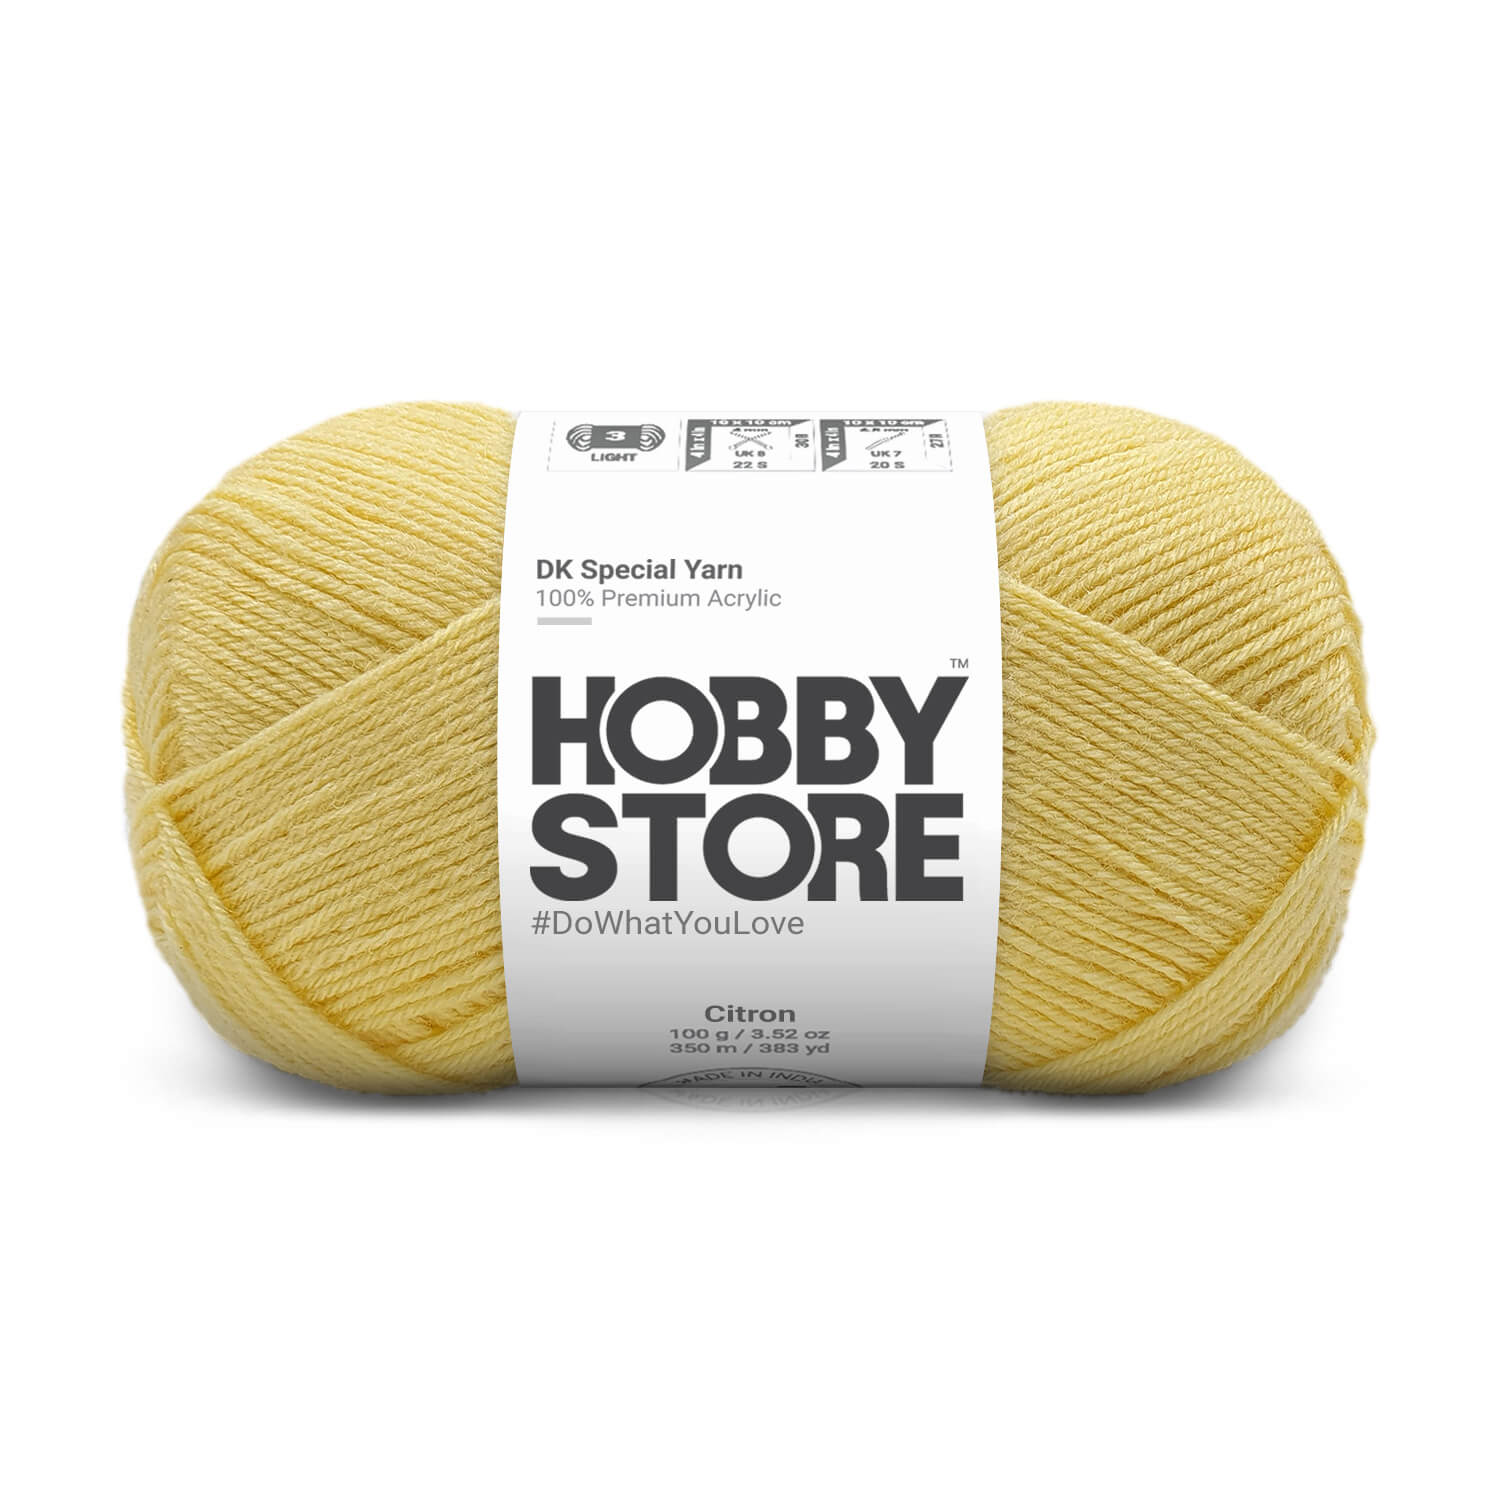 Hobby Store DK Special Yarn - Citron 1263